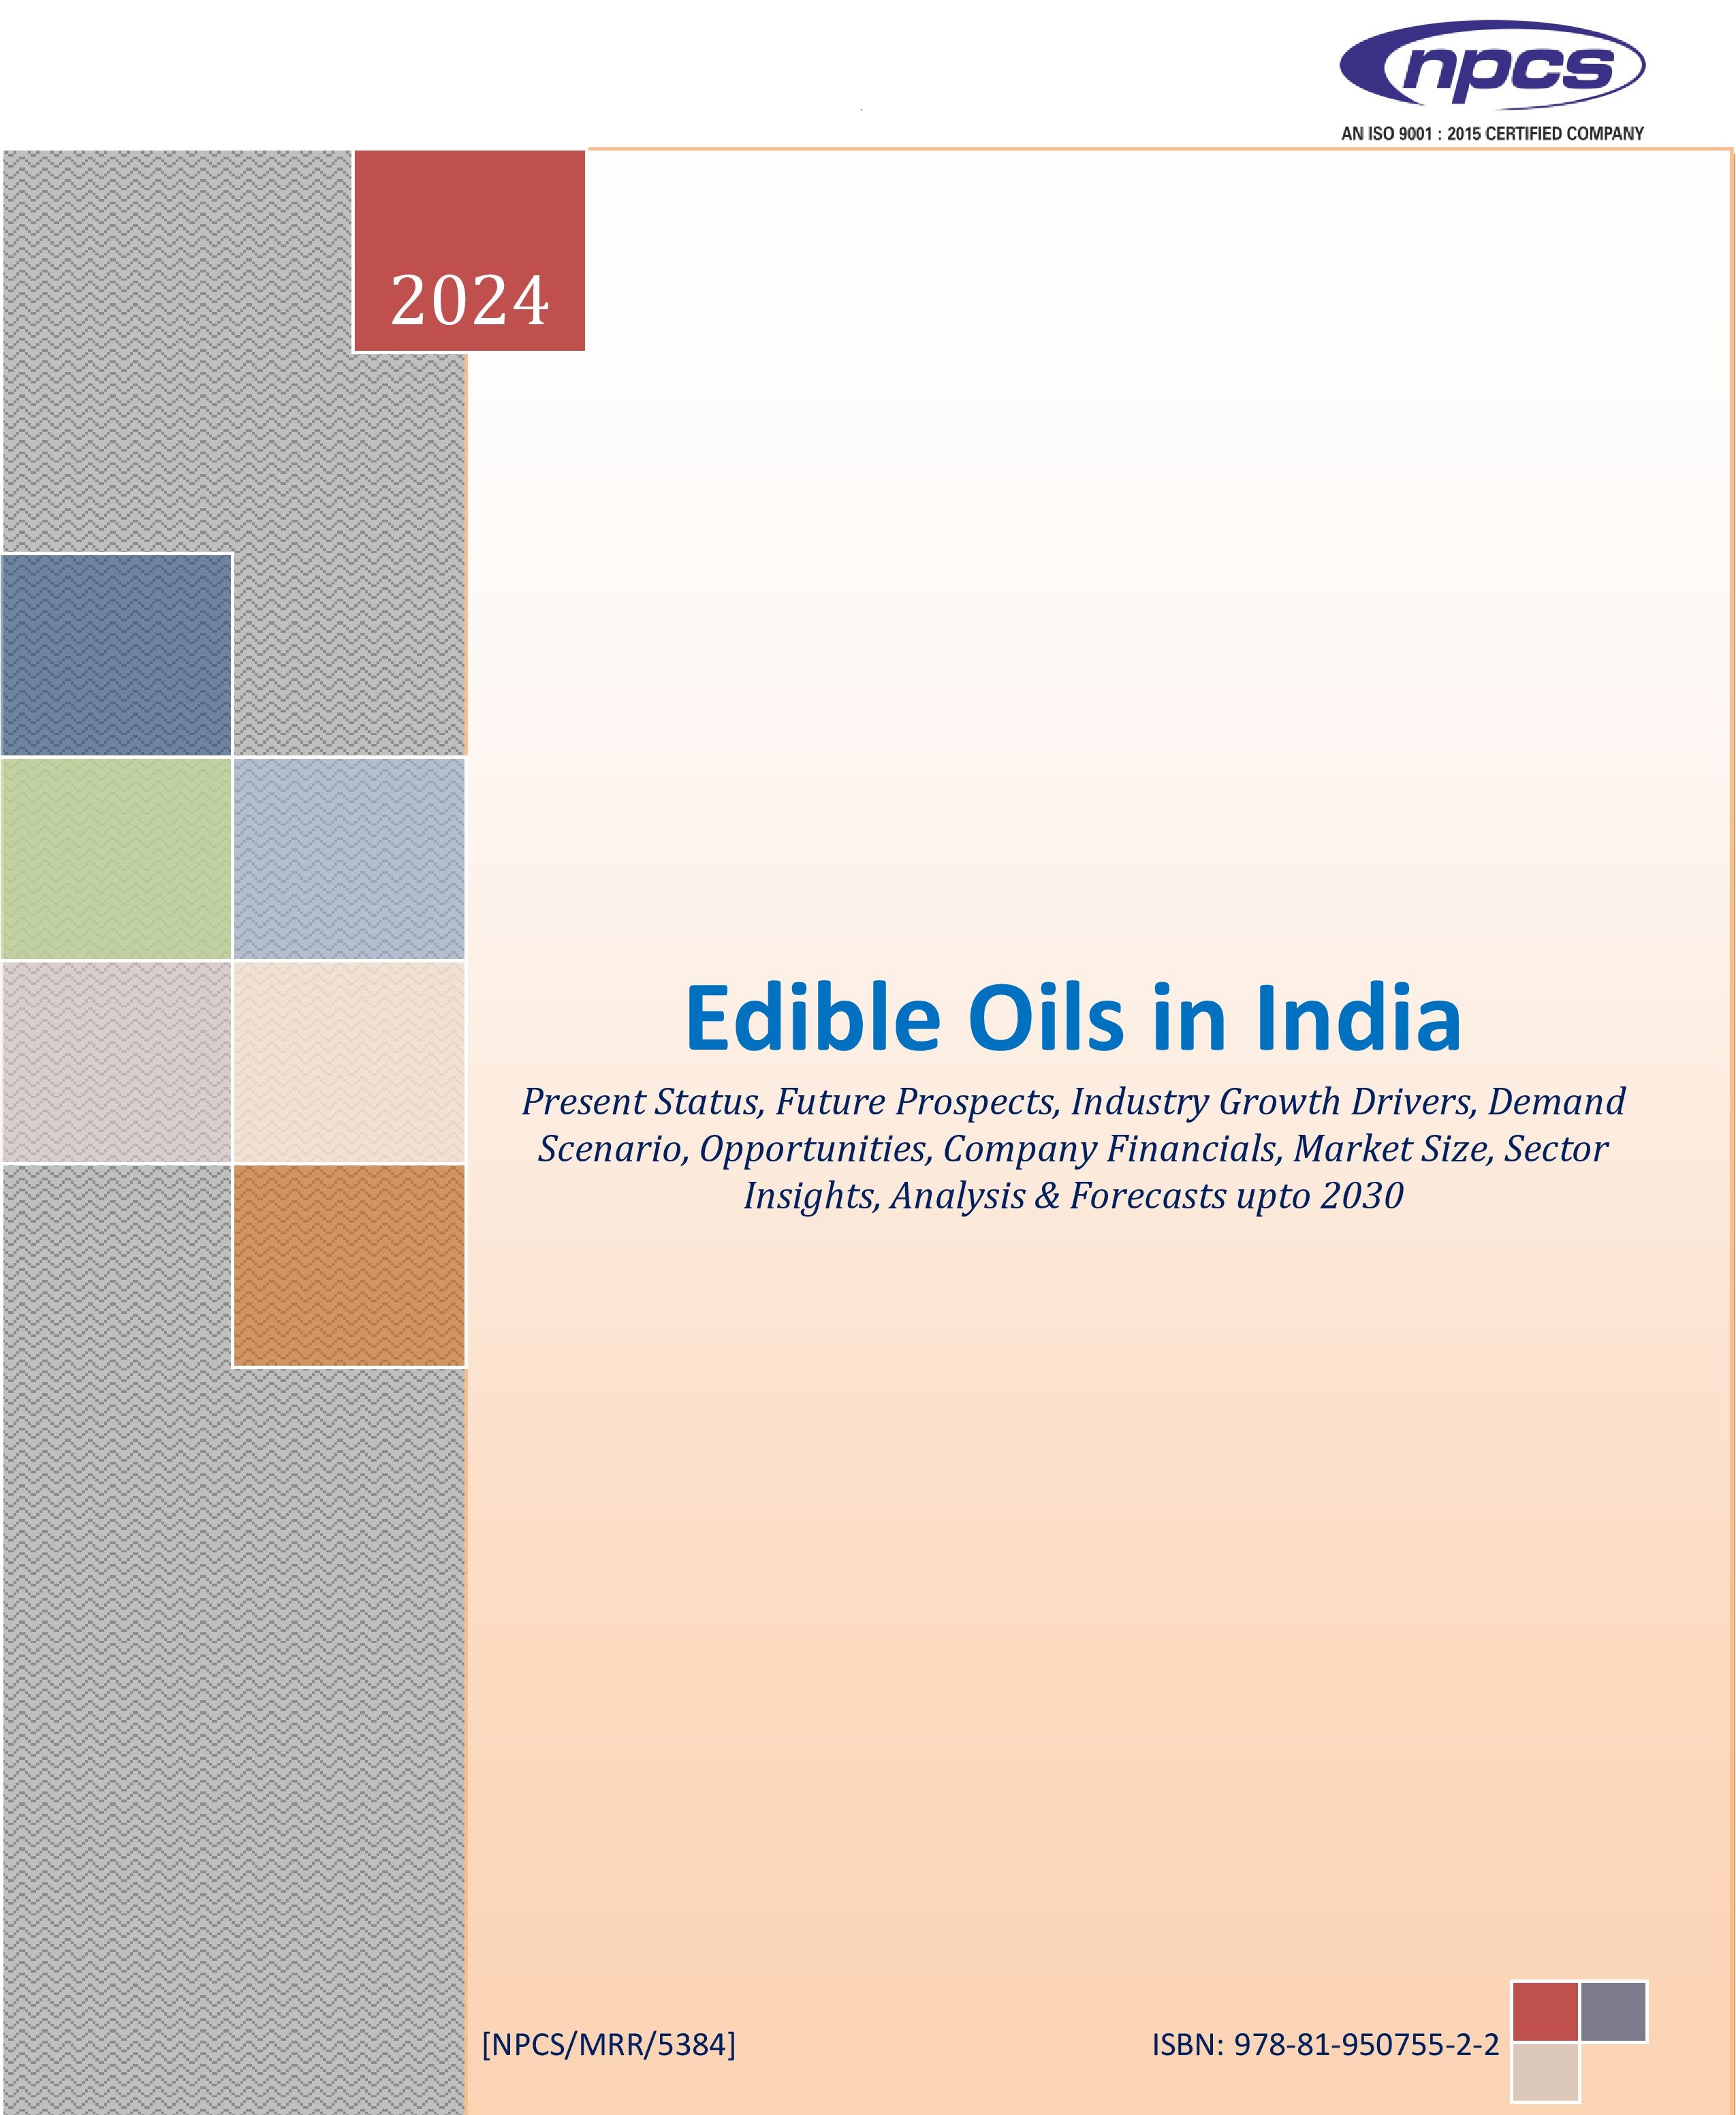 Edible Oils in India (Present Status, Future Prospects, Industry Growth, Drivers, Demand Scenario, Opportunities, Company Financials, Market Size, Sector Insights, Analysis & Forecast Upto 2030) Market Research Report